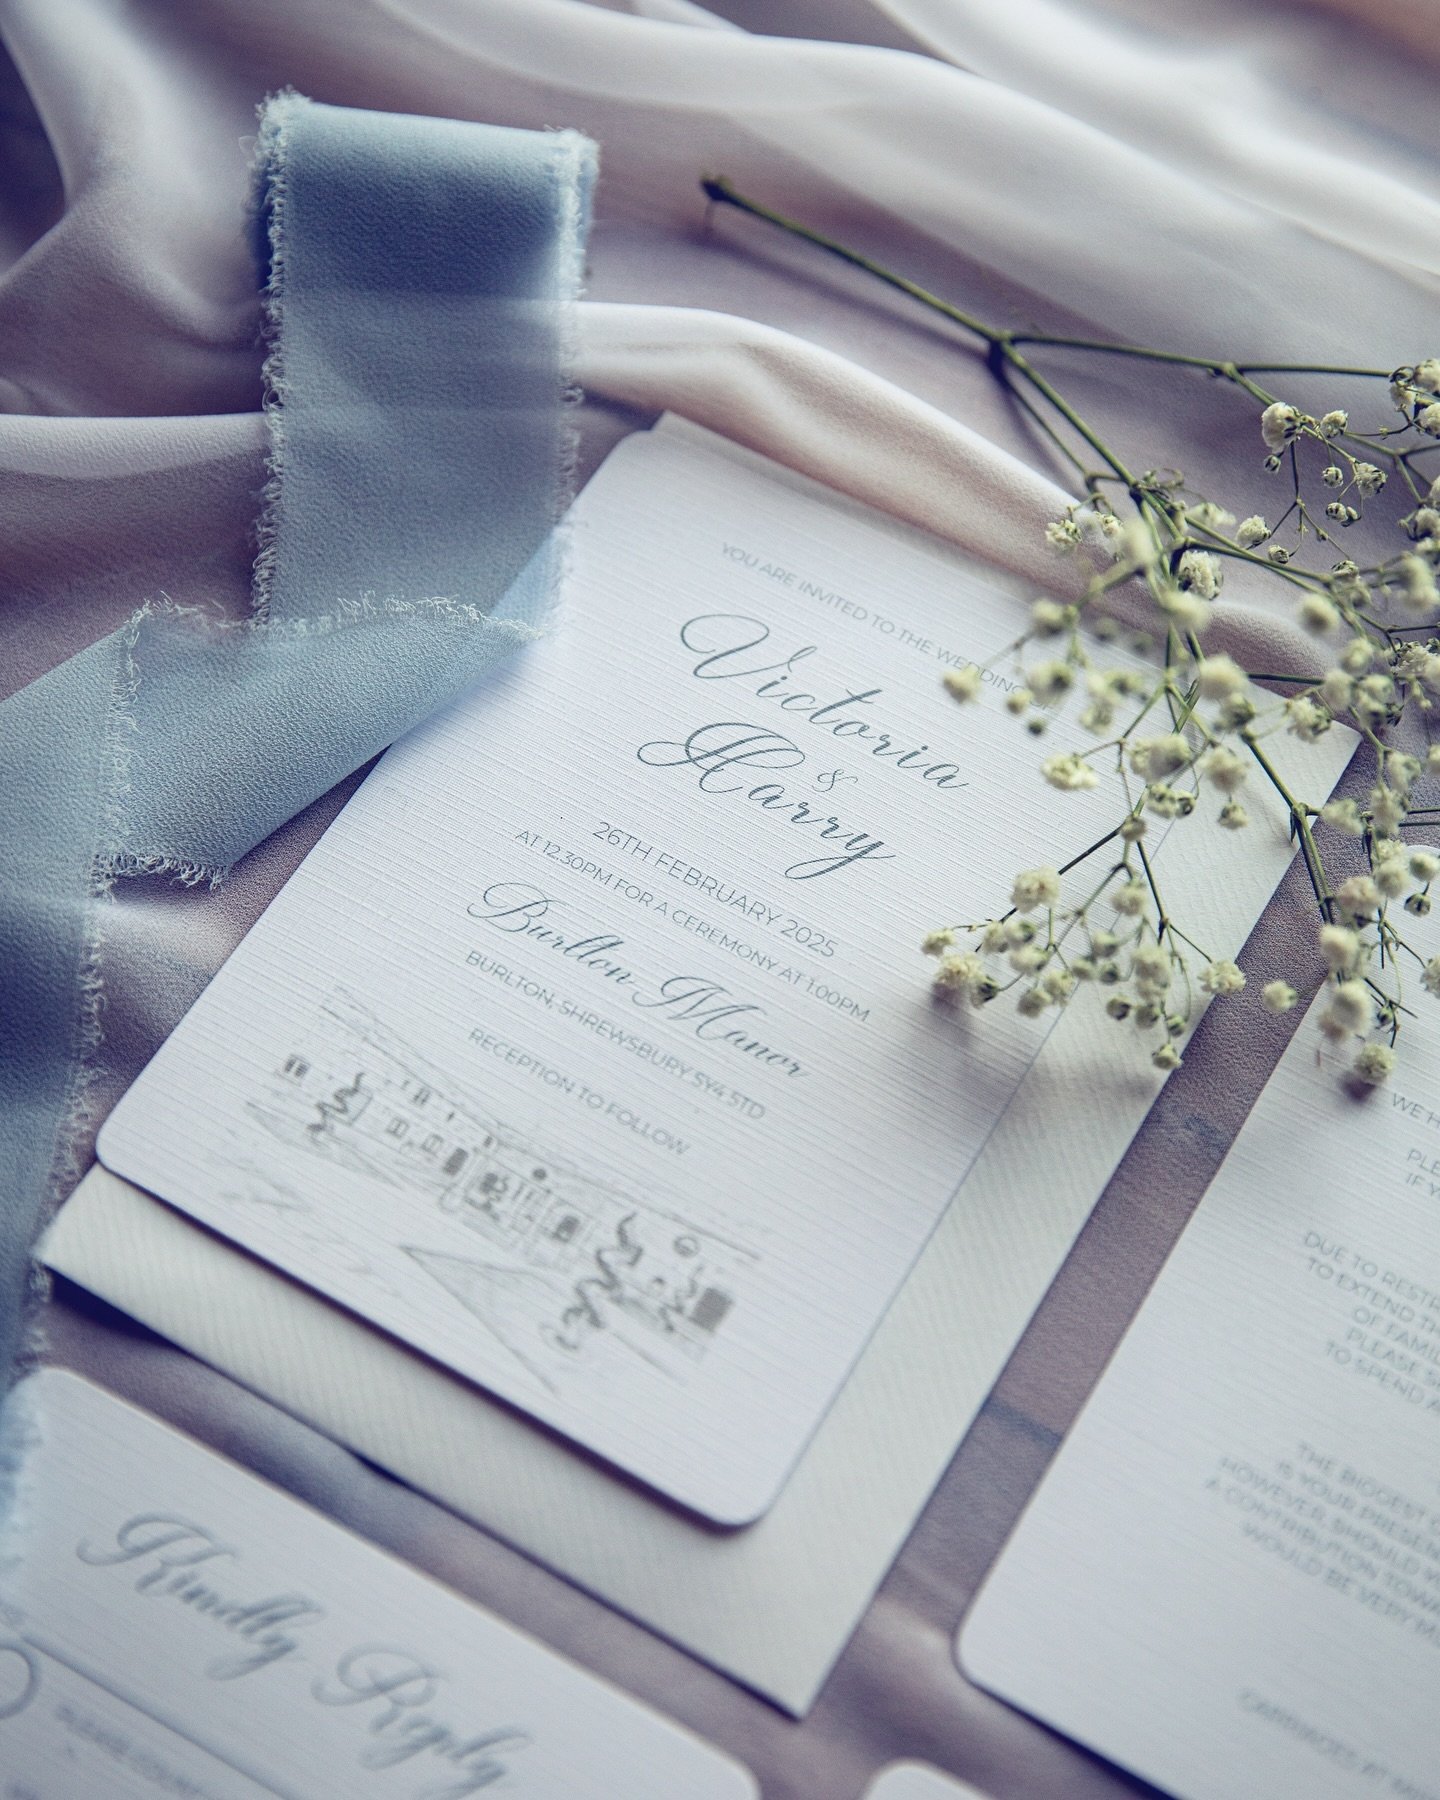 Top Tip! 💍

Don&rsquo;t forget to take your invite along with you on your wedding day.

Ask your photographer to take a beautiful &lsquo;details&rsquo; shot of all your special items. 📷 

You can include your:

Invitation
Shoes
Perfume 
Earrings
Ne